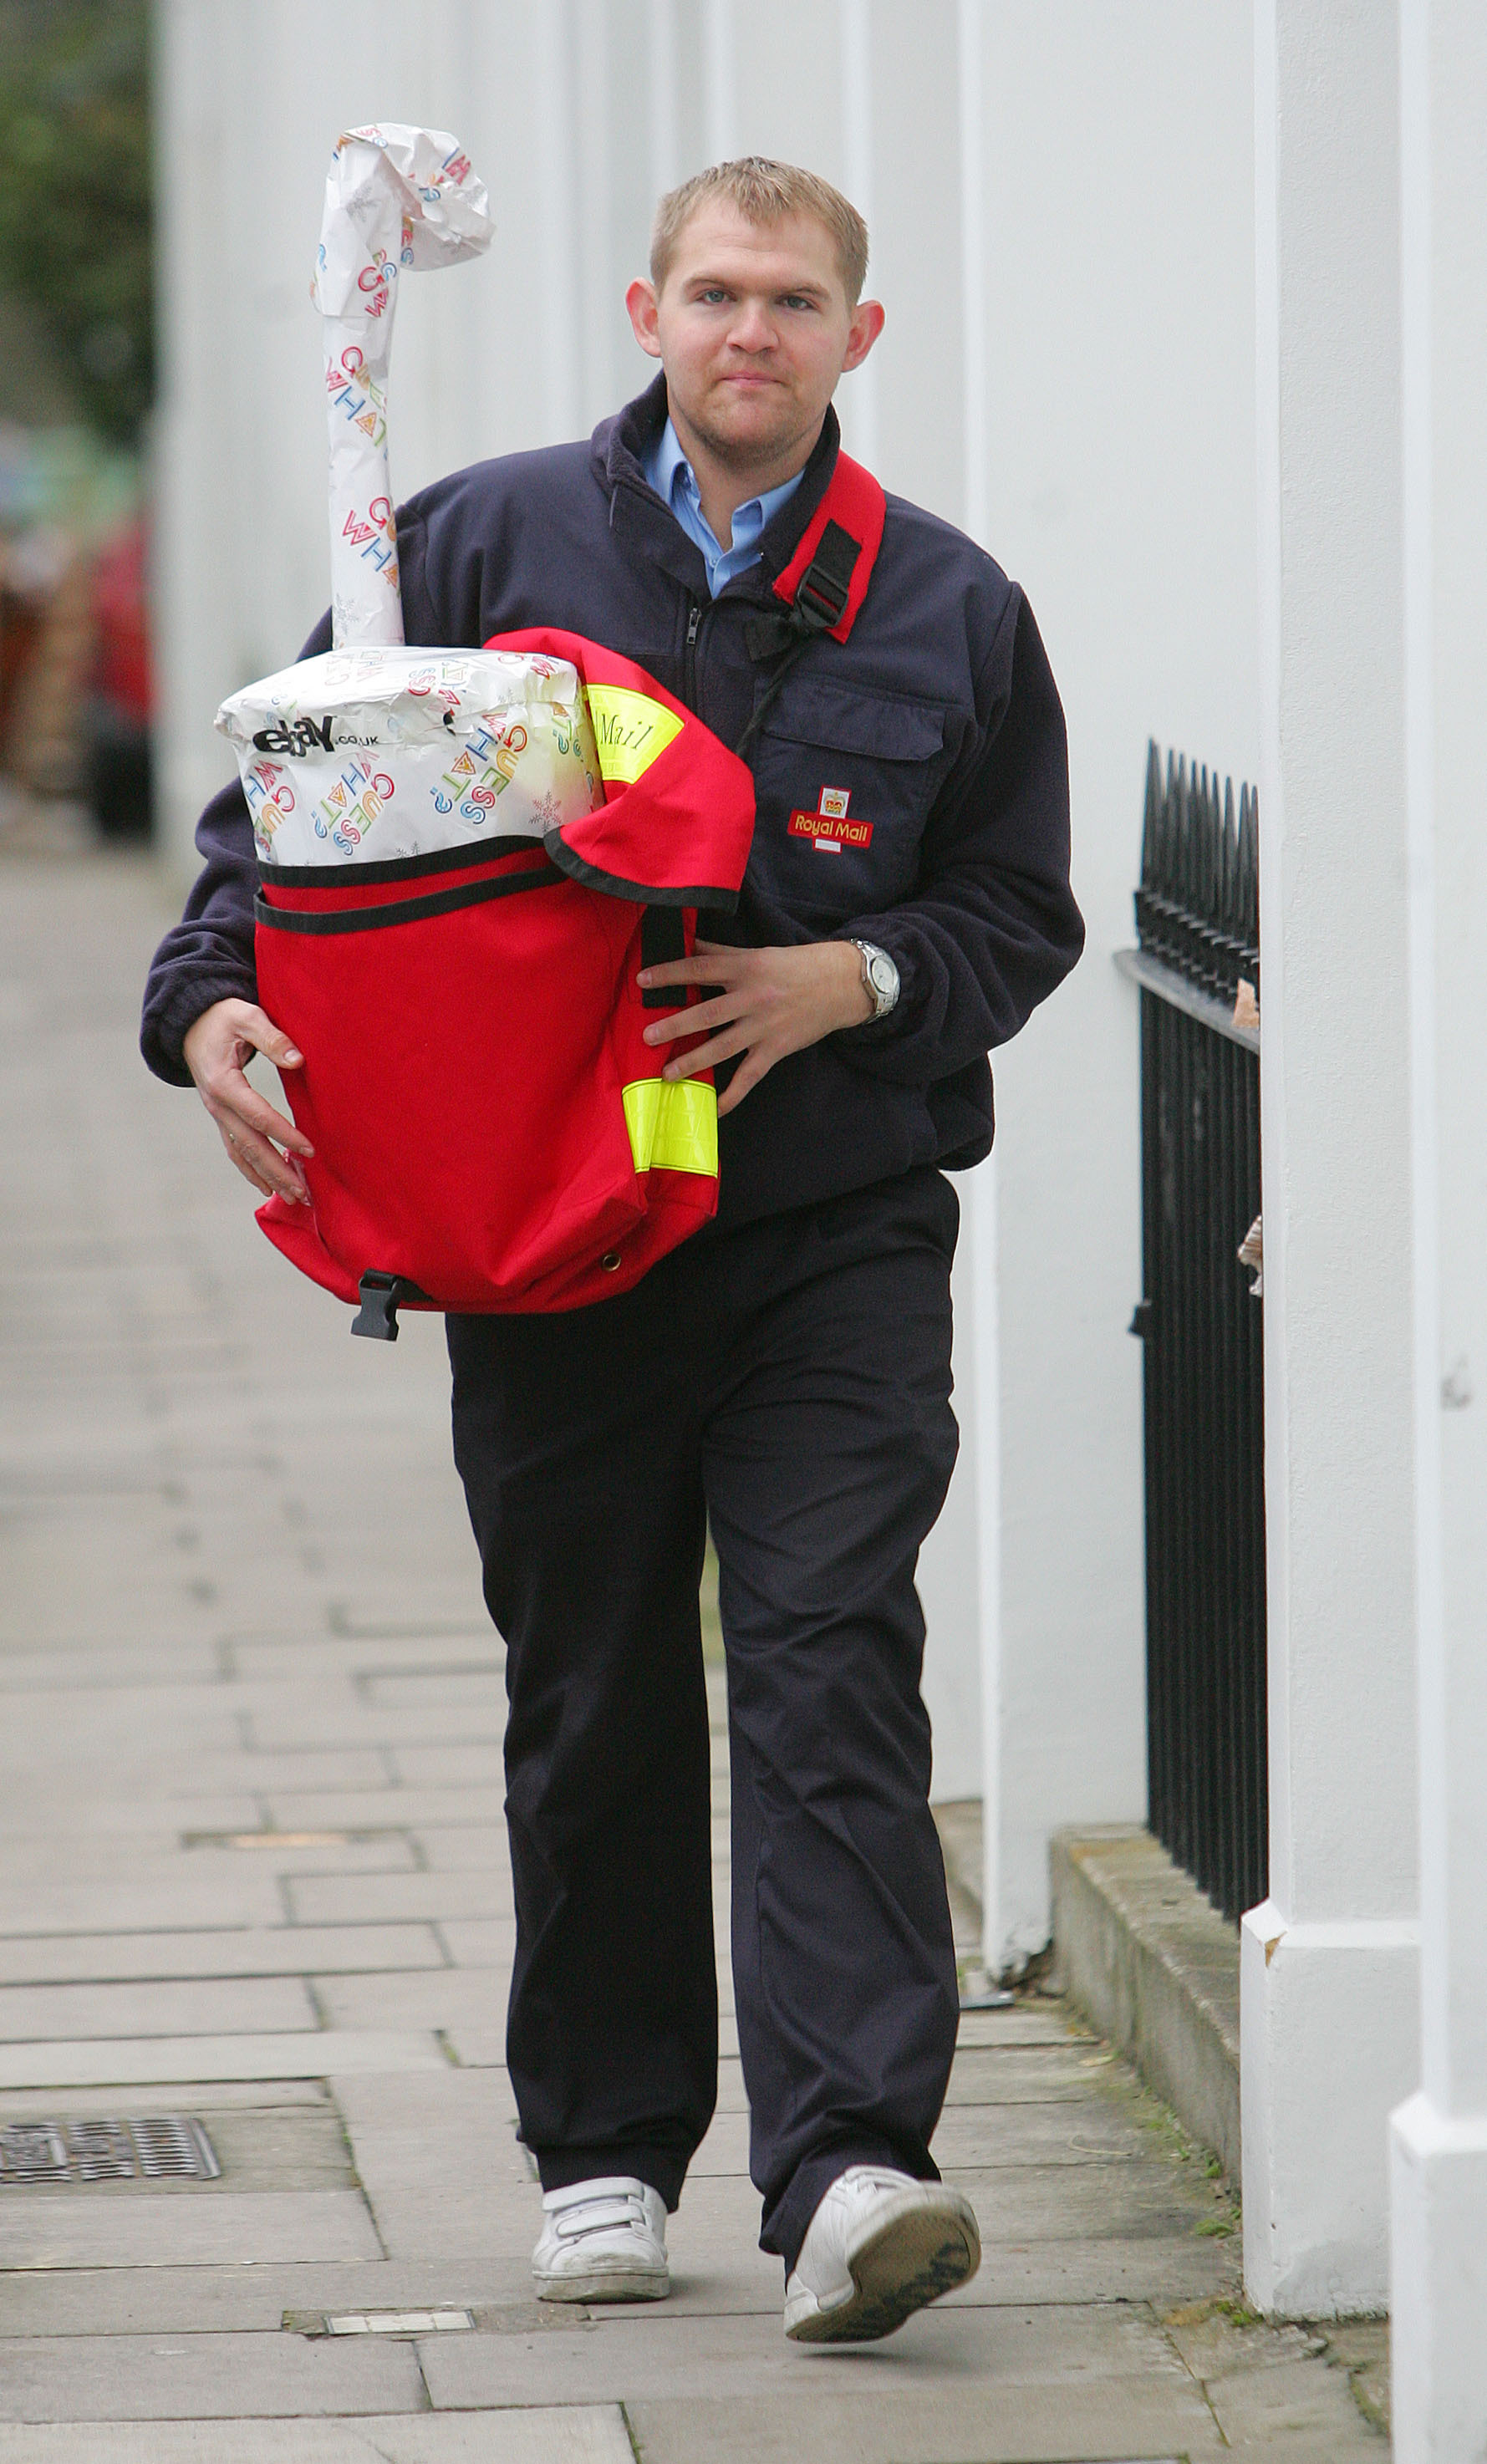 A postman pictured in 2008